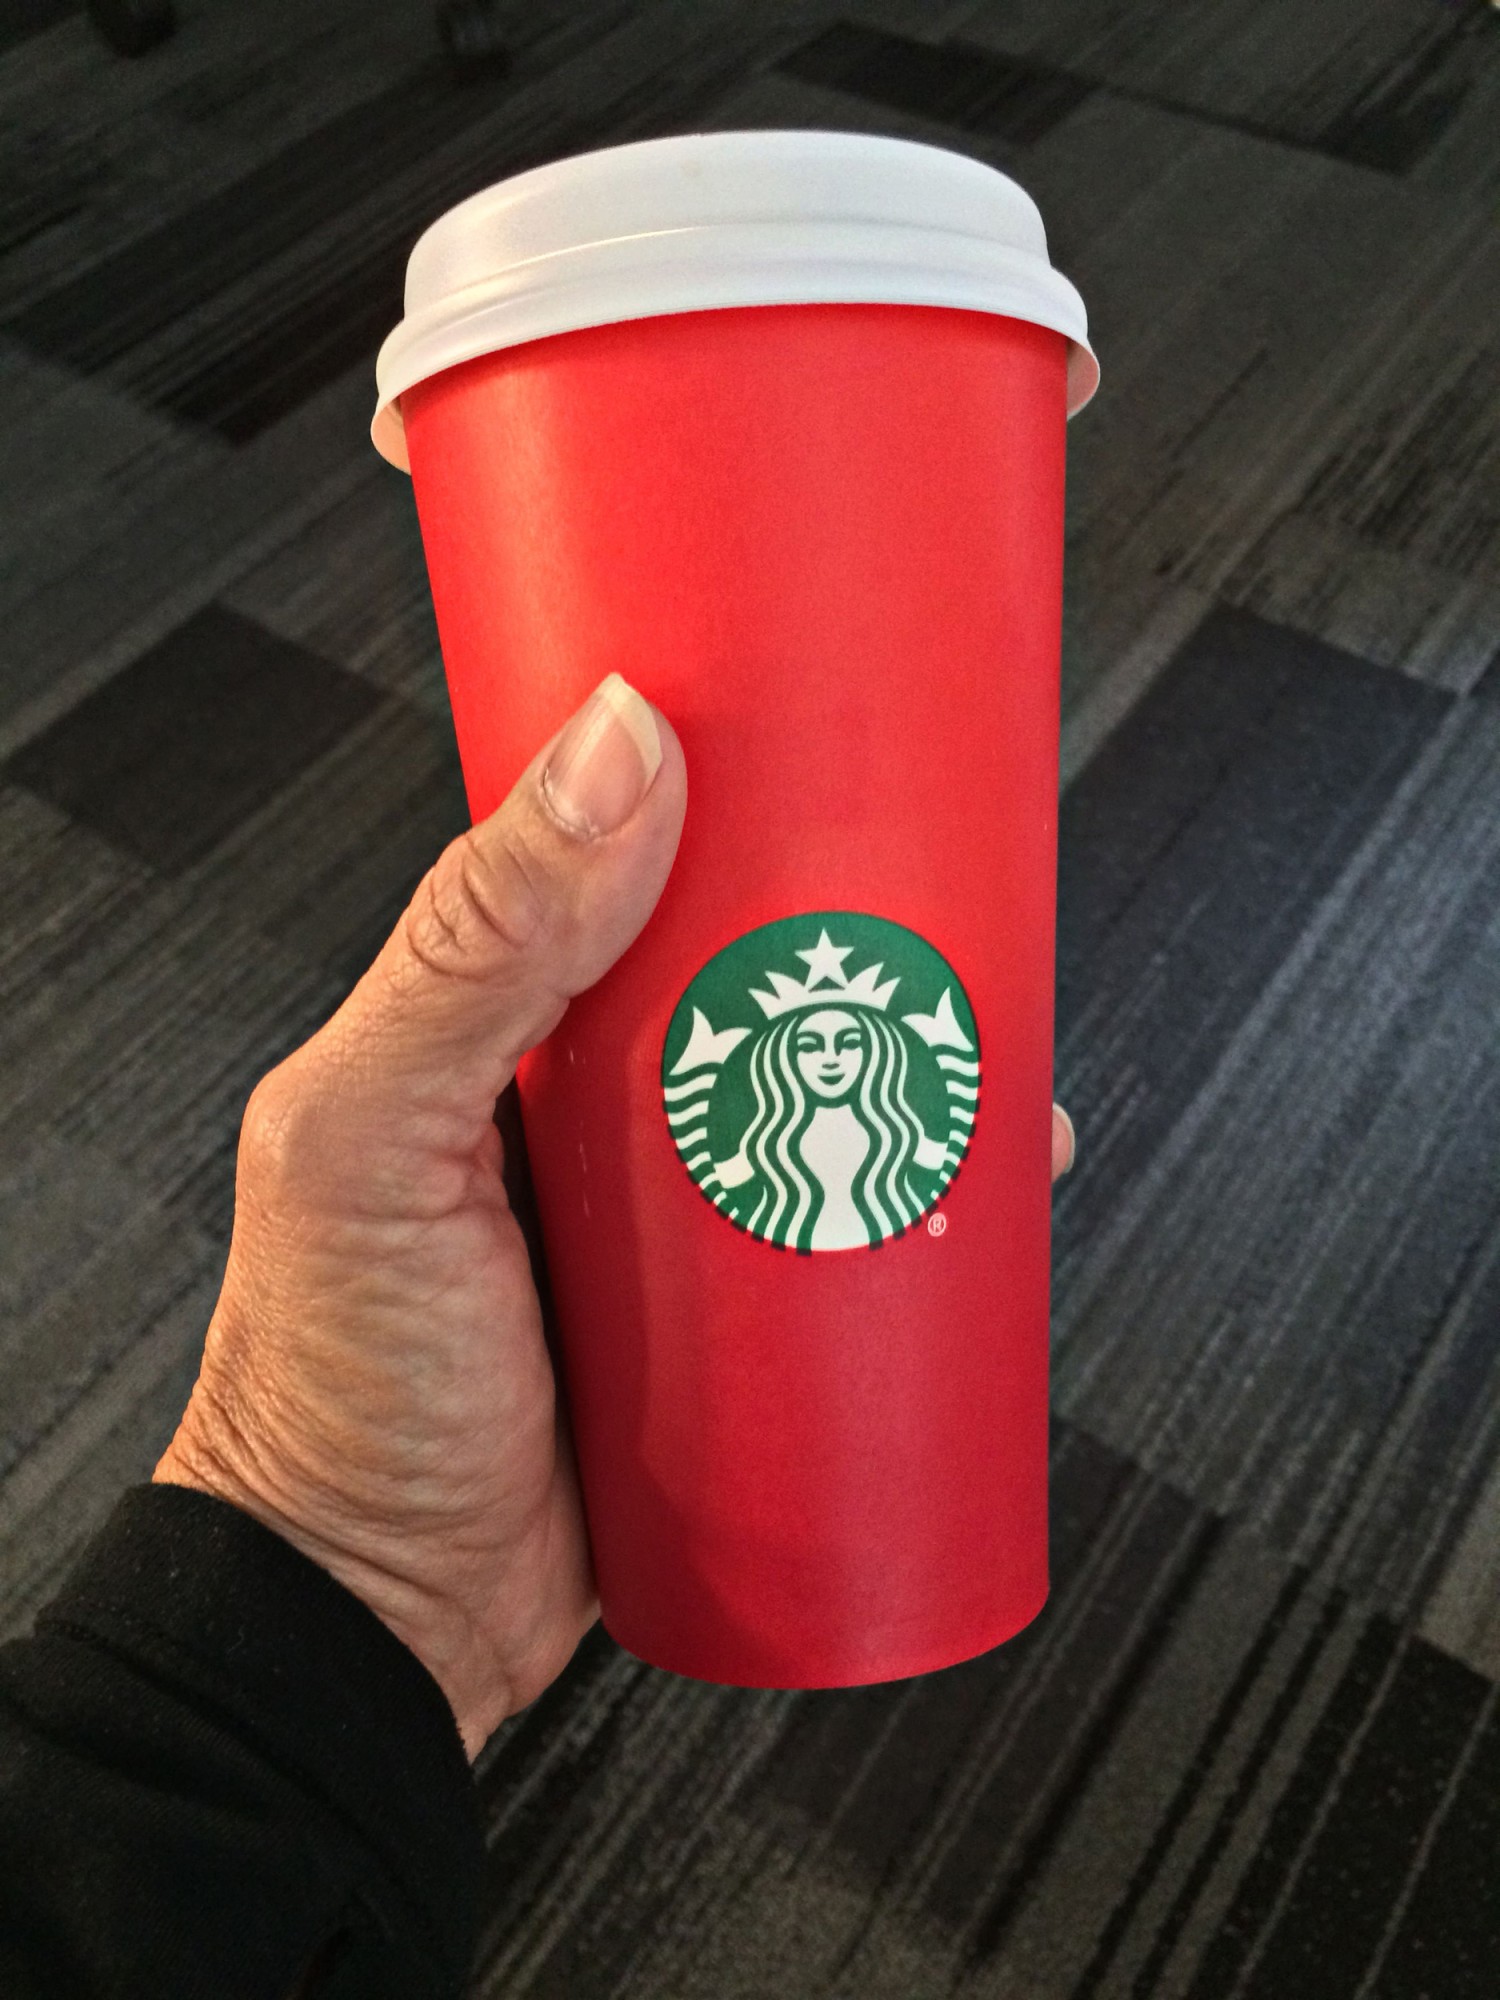 Here's Why The Drama Over Red Holiday Cups Is A Win For Starbucks